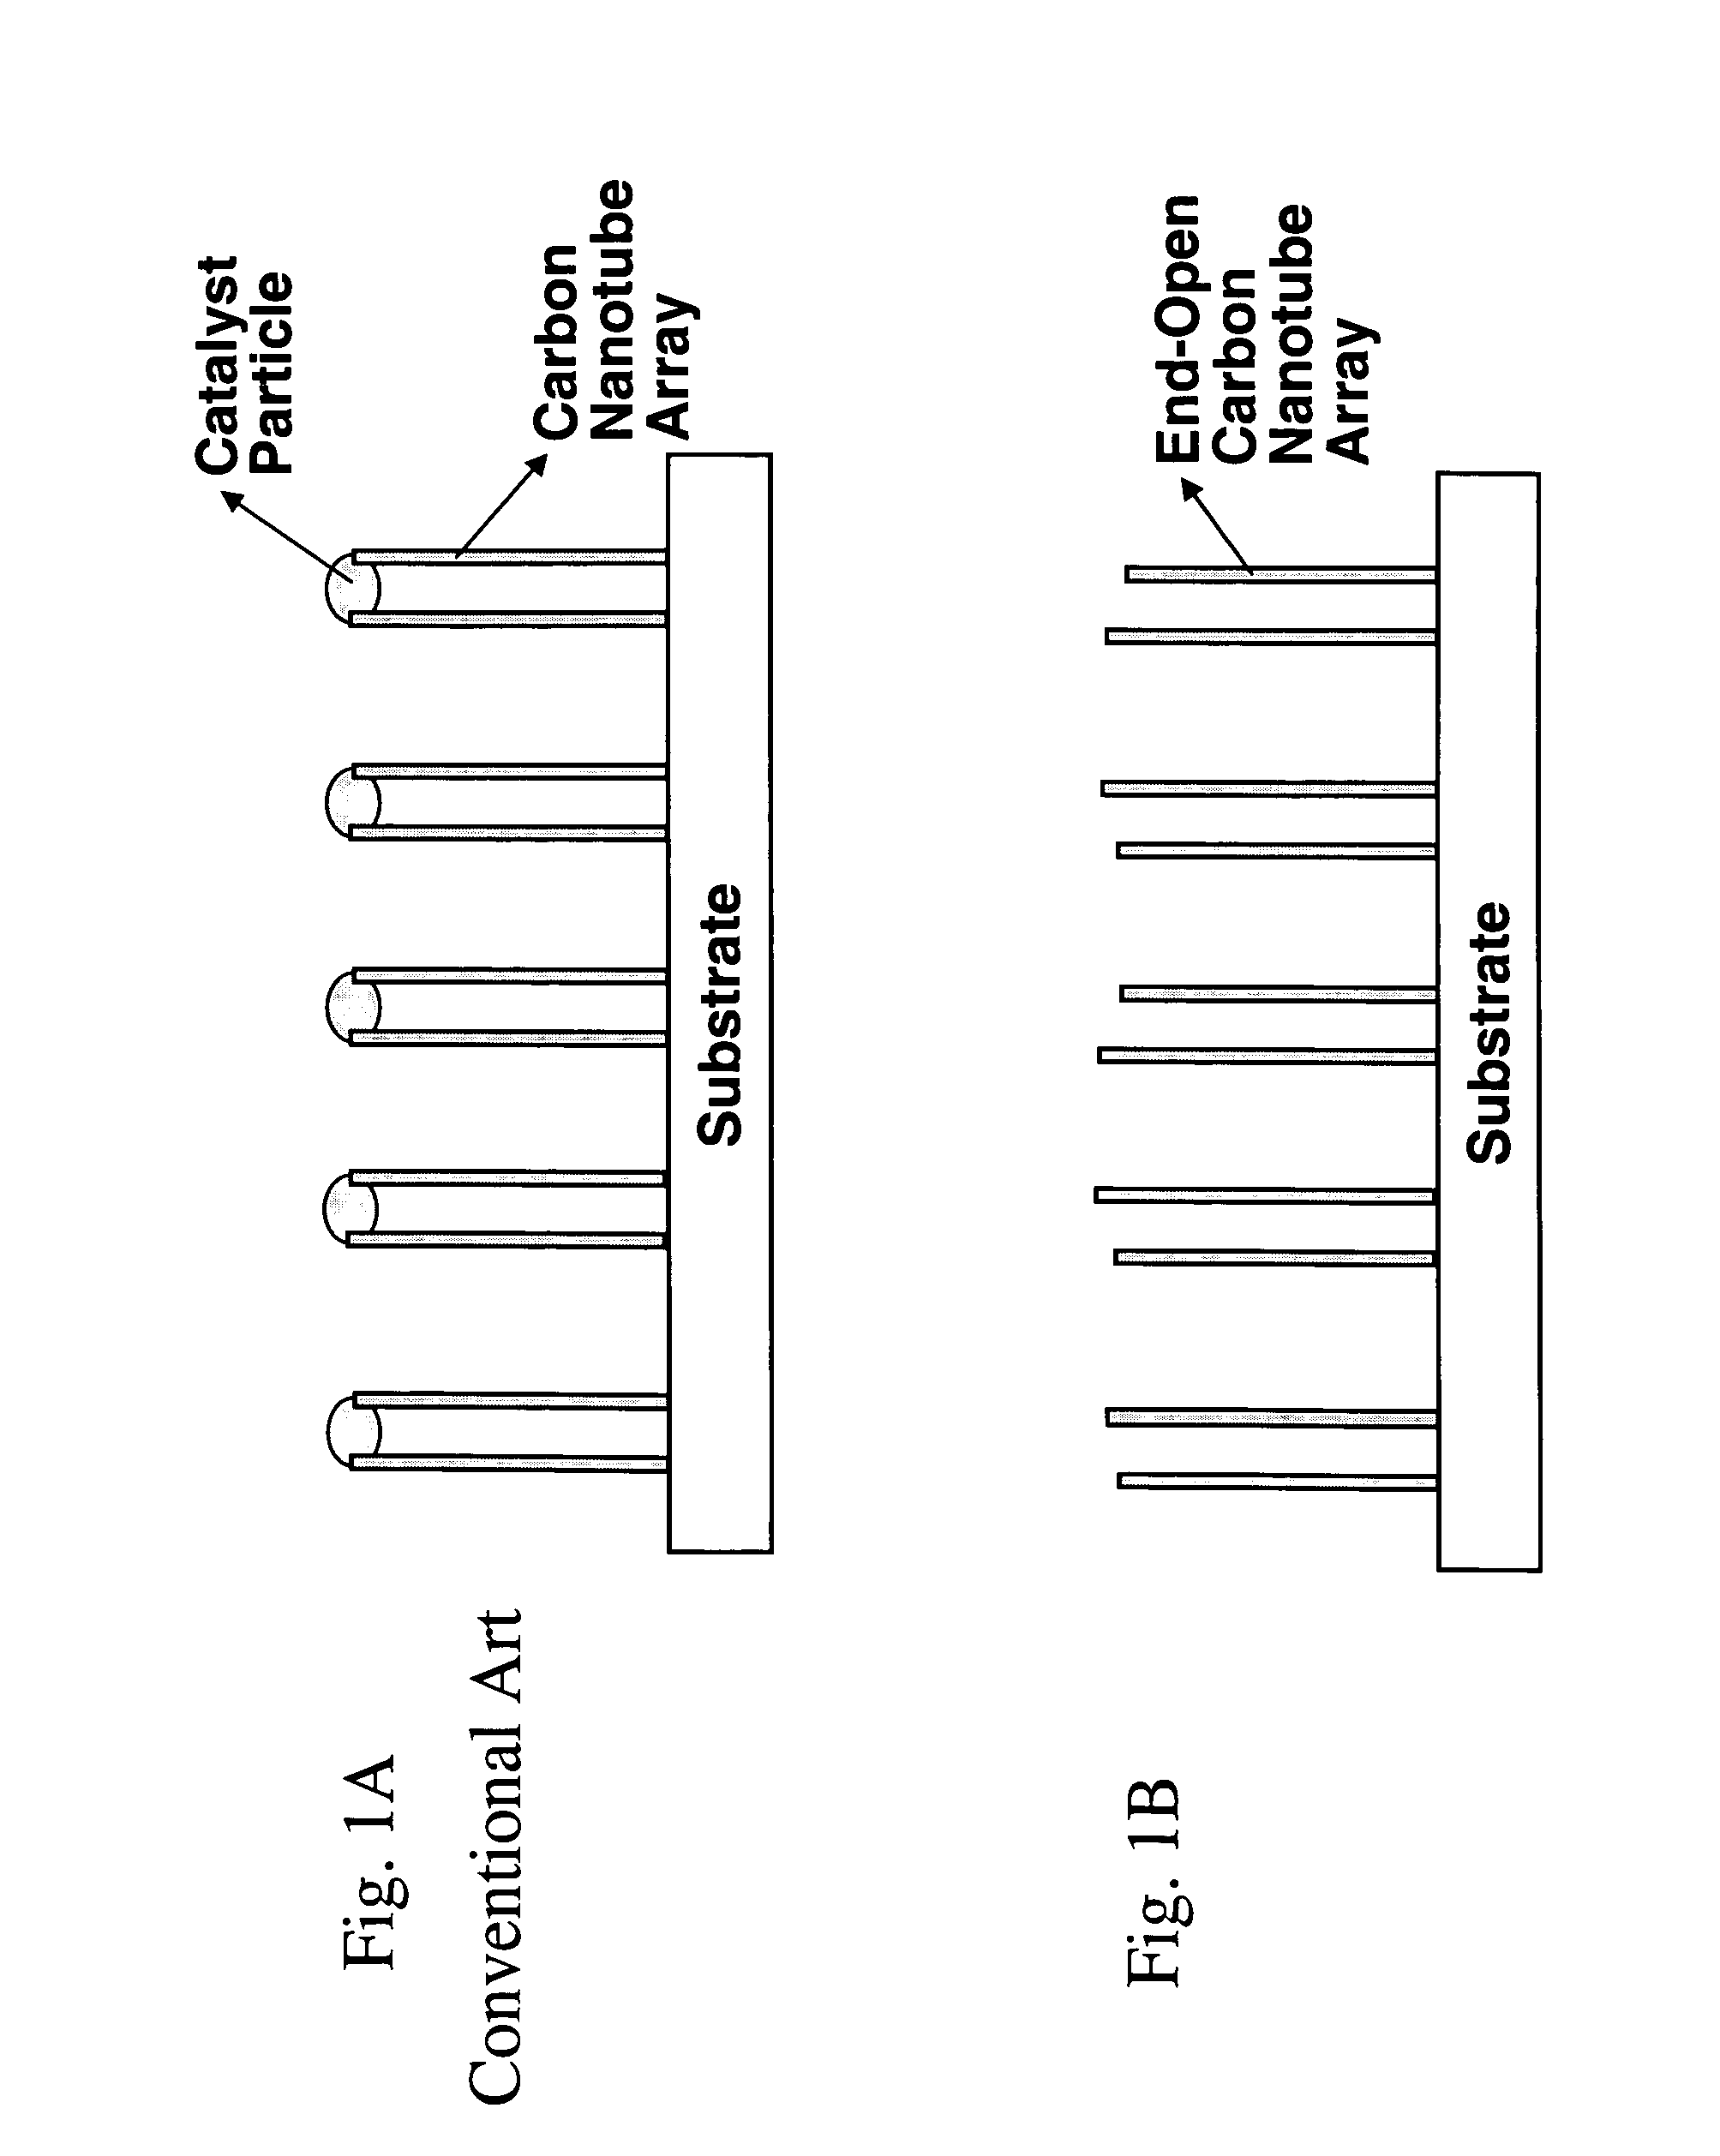 Aligned and open-ended nanotube structure and method for making the same